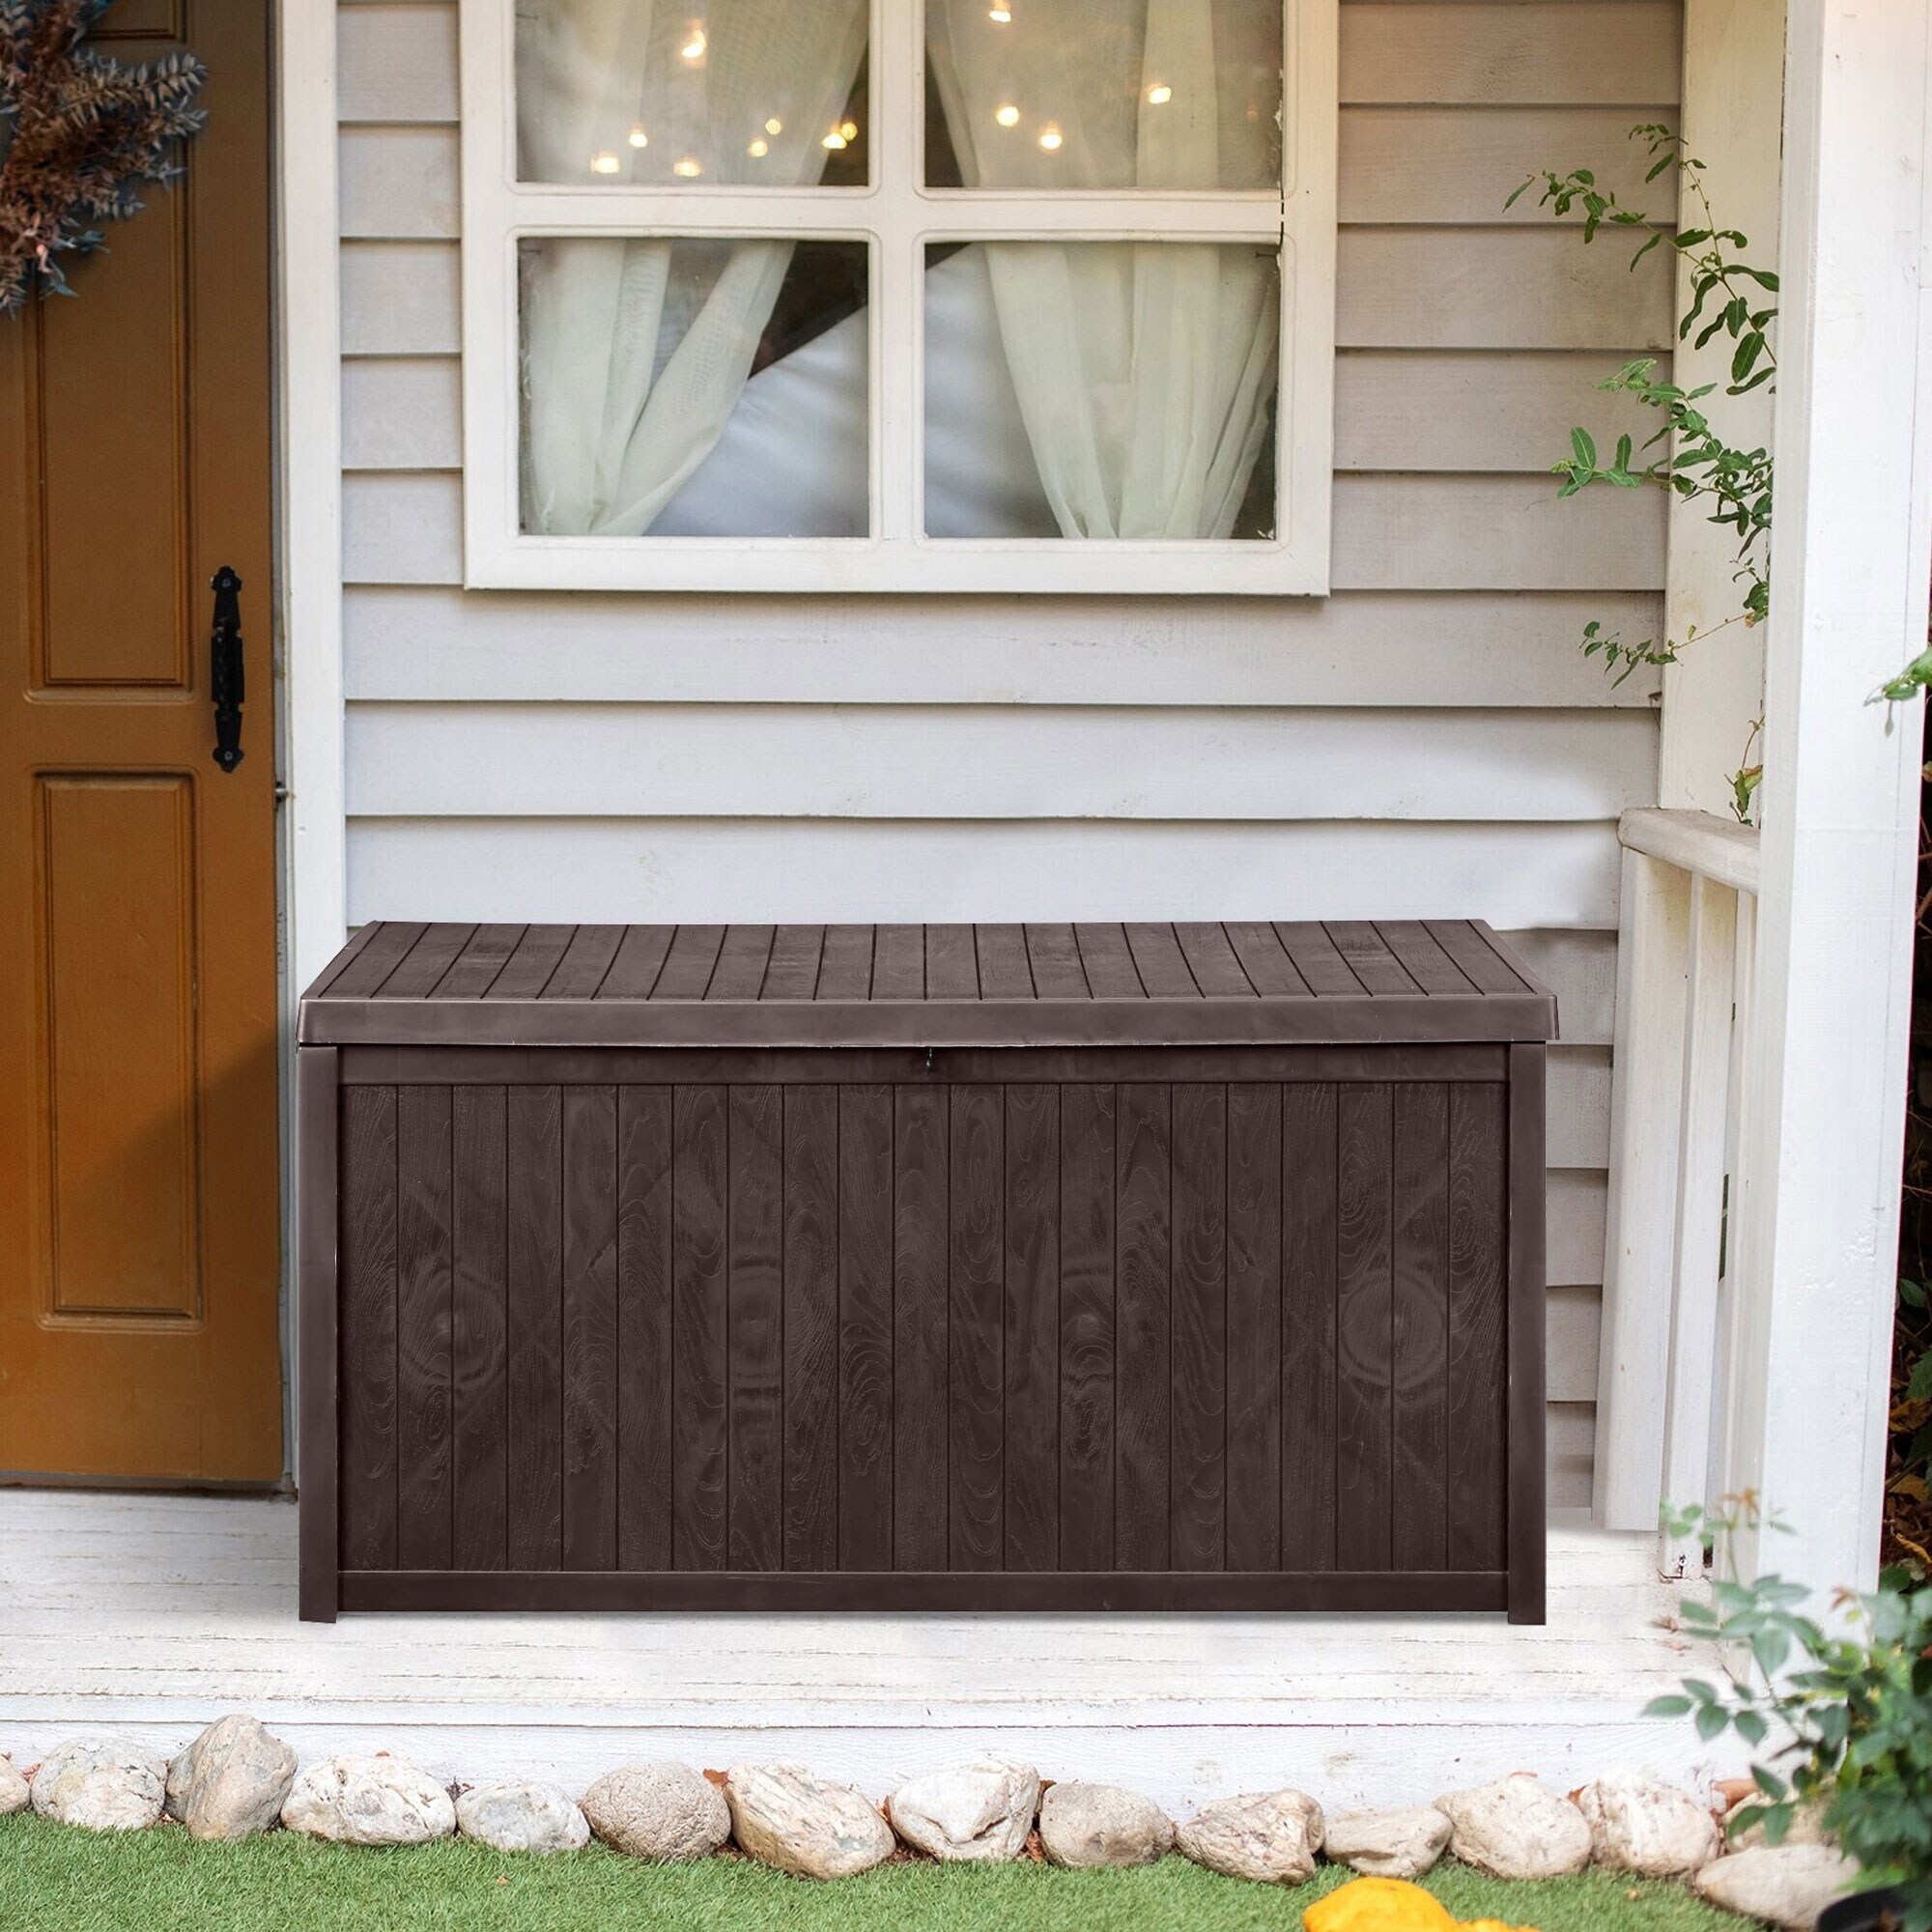 https://ak1.ostkcdn.com/images/products/is/images/direct/bcd56758e0c8191adb50eac6343d91cc8c9281b2/113-Gallon-Outdoor-Storage-Box-Patio-Storage-Container.jpg